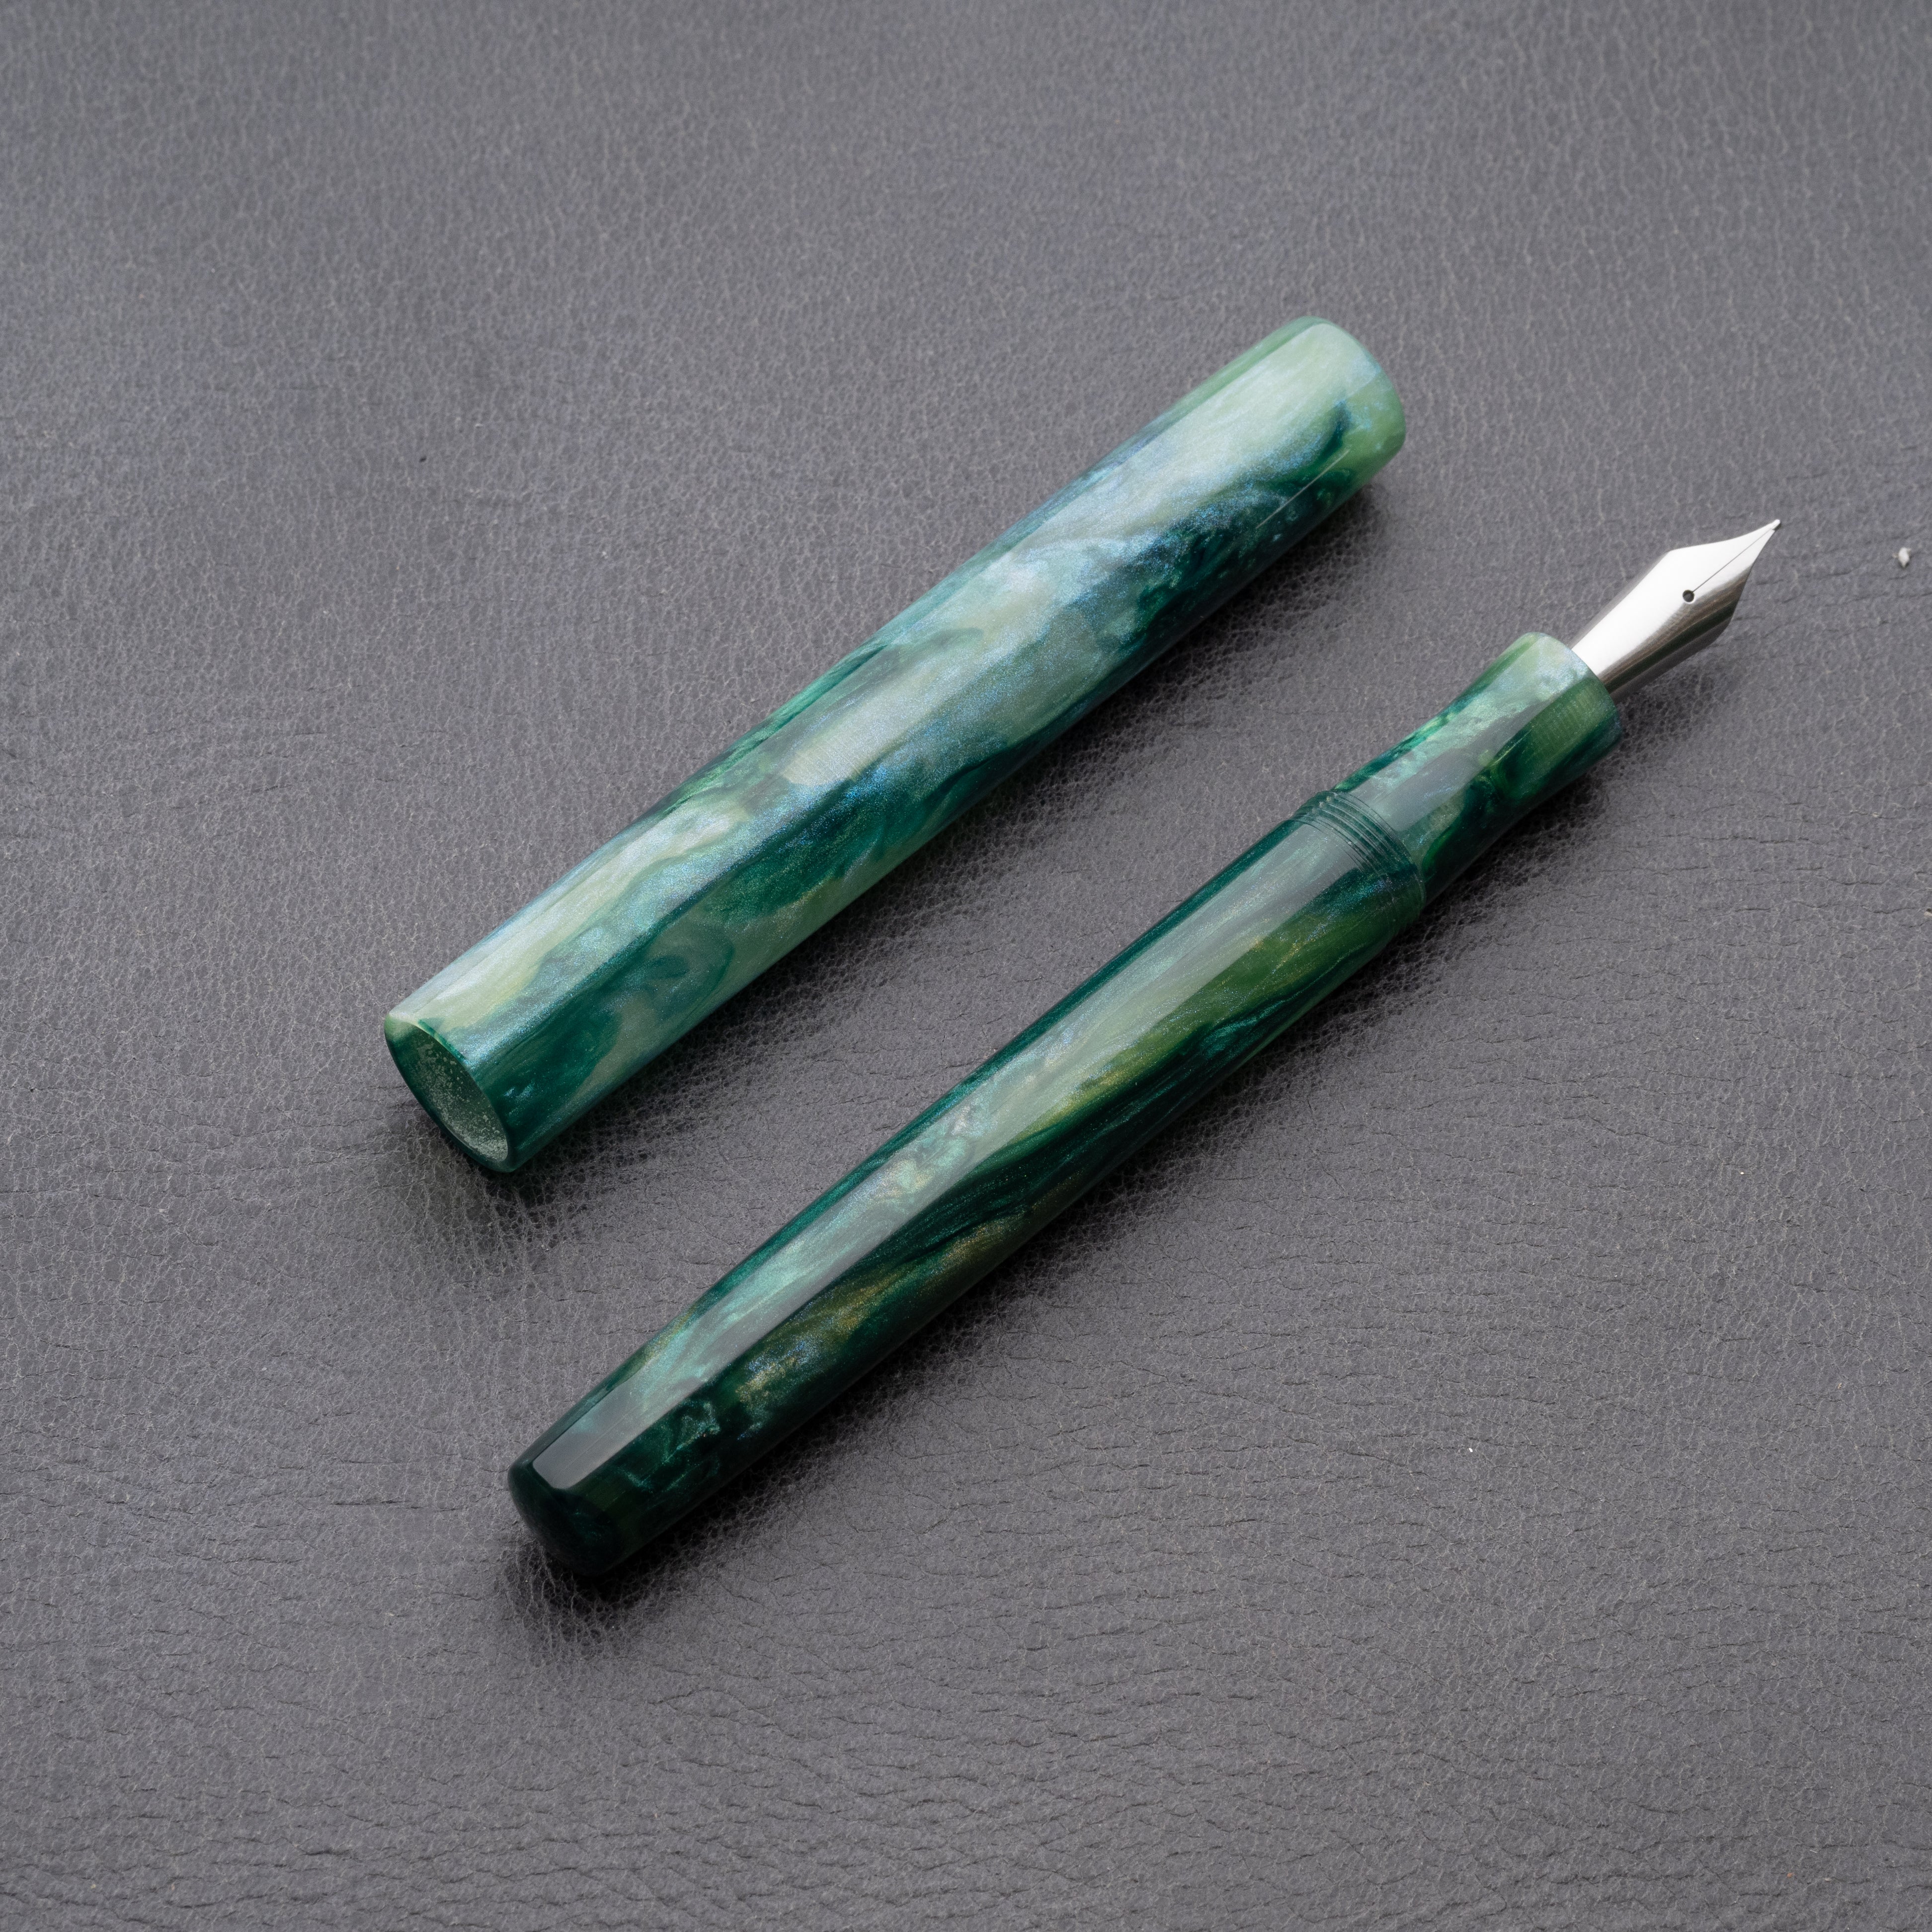 Fountain Pen - Bock #6 - 13 mm - In house cast from multiple greens and a bit of blue